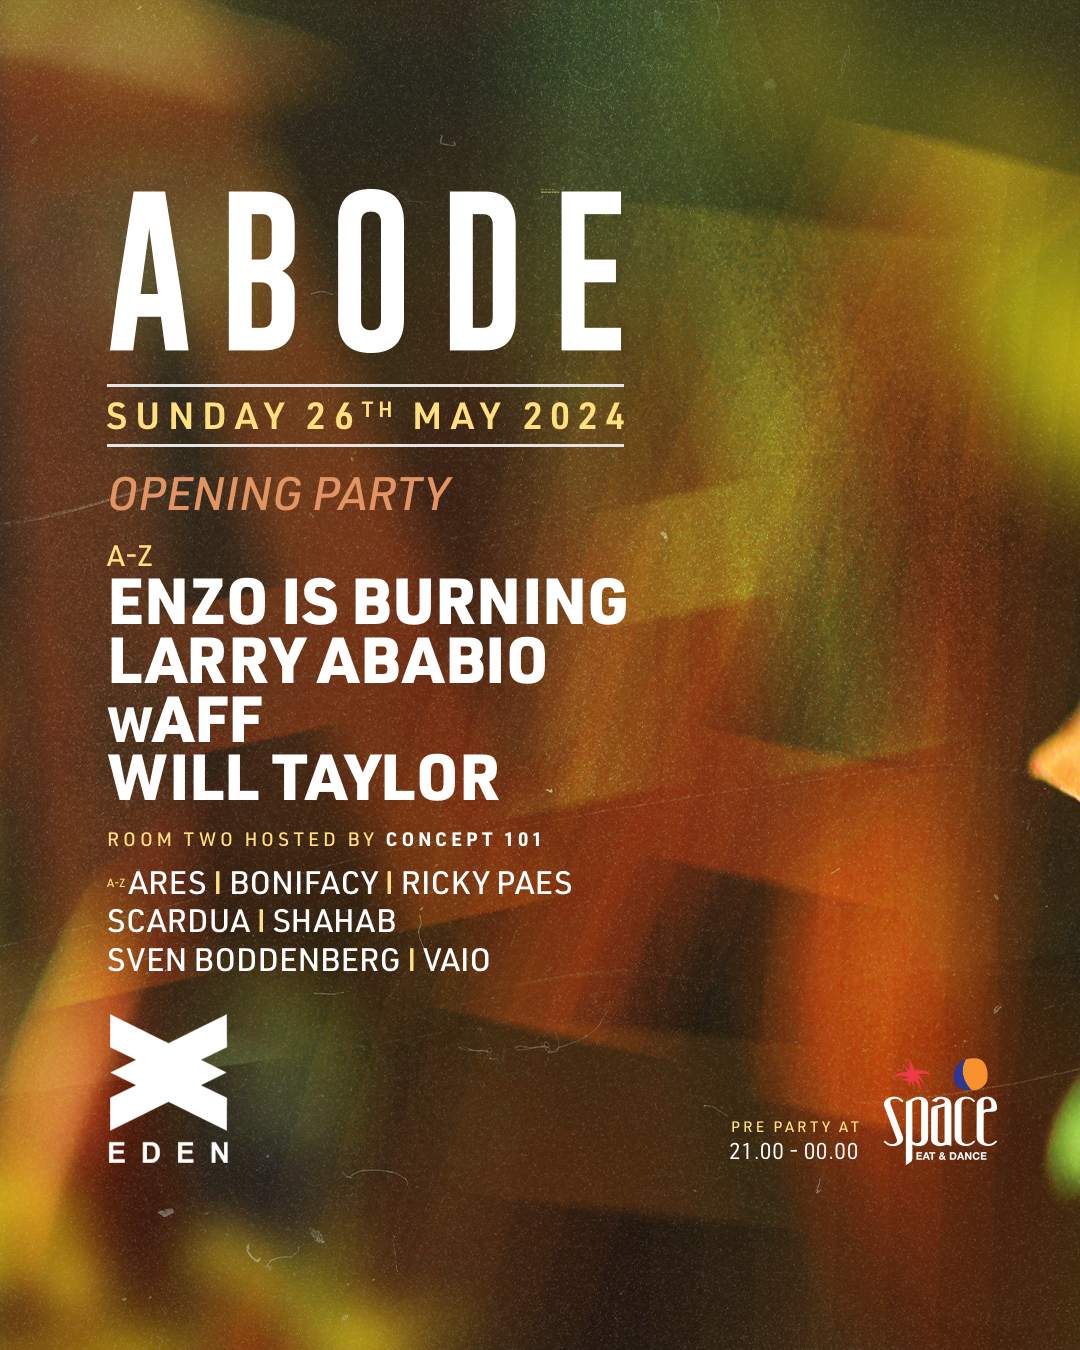 ABODE Sundays - May 26th (Opening party) - フライヤー表